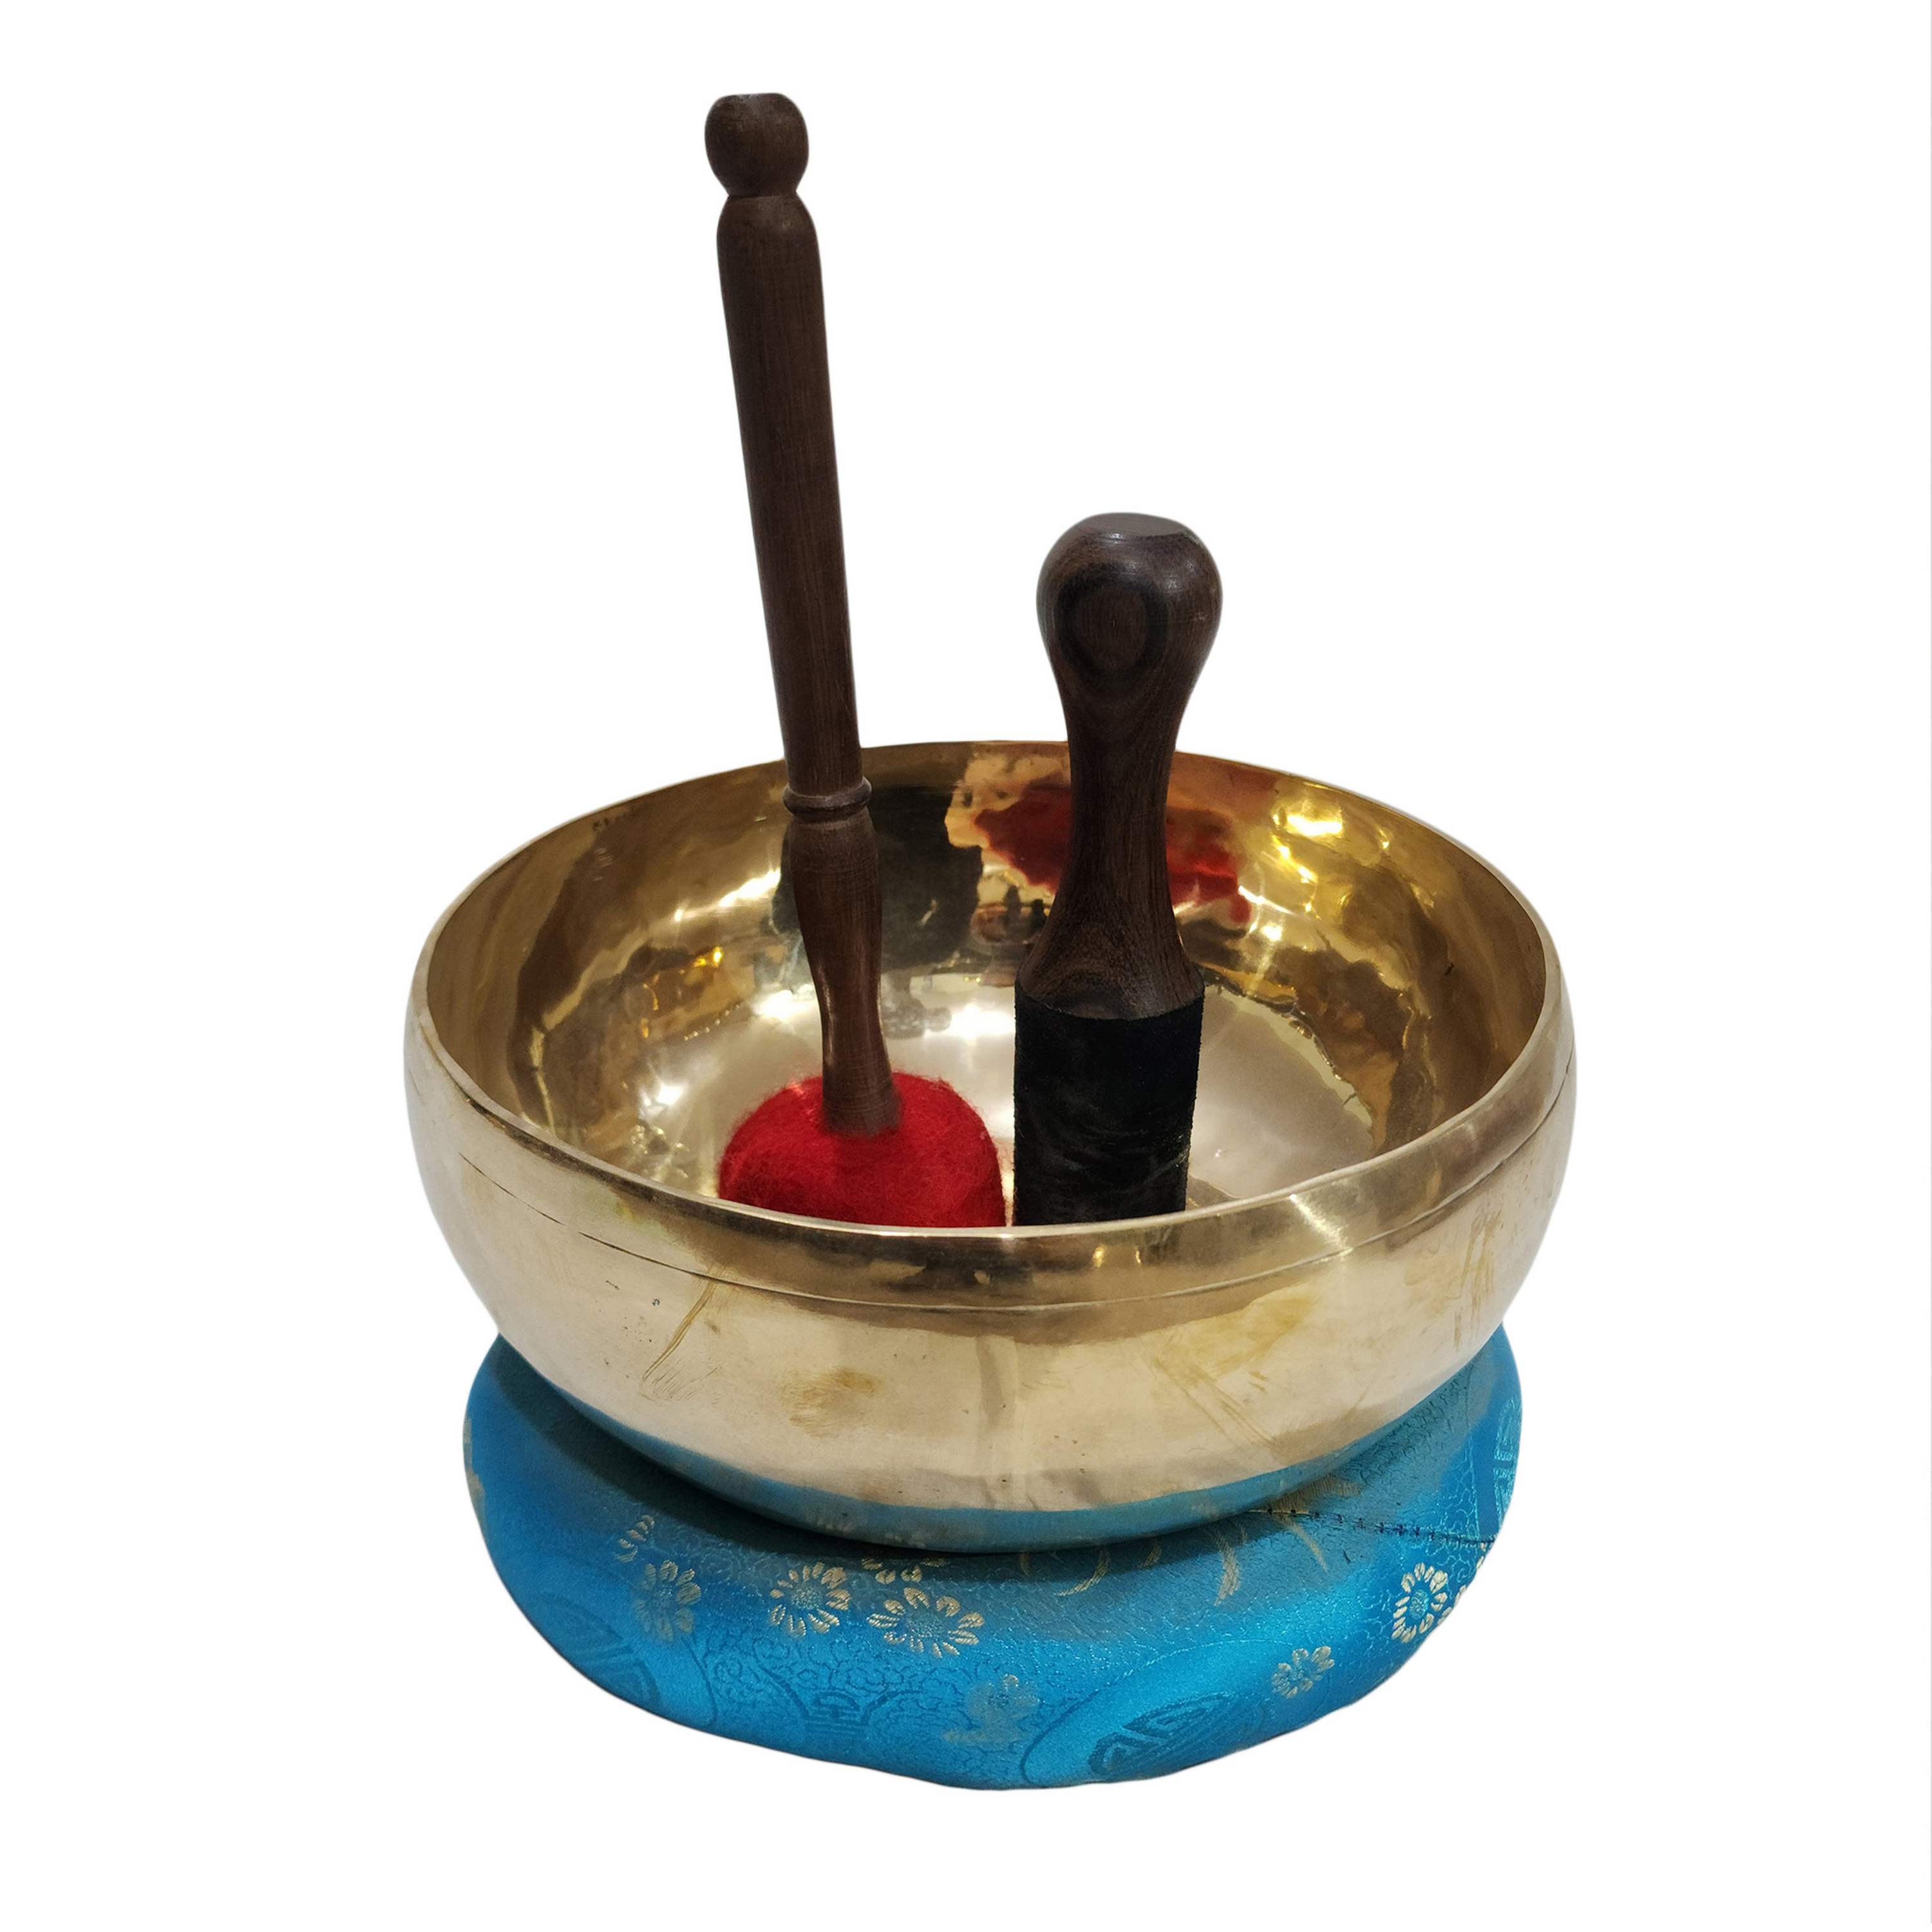 Singing Bowl, Buddhist Hand Beaten Therapy Bowls, With Glossy Finishing, Head Bowl